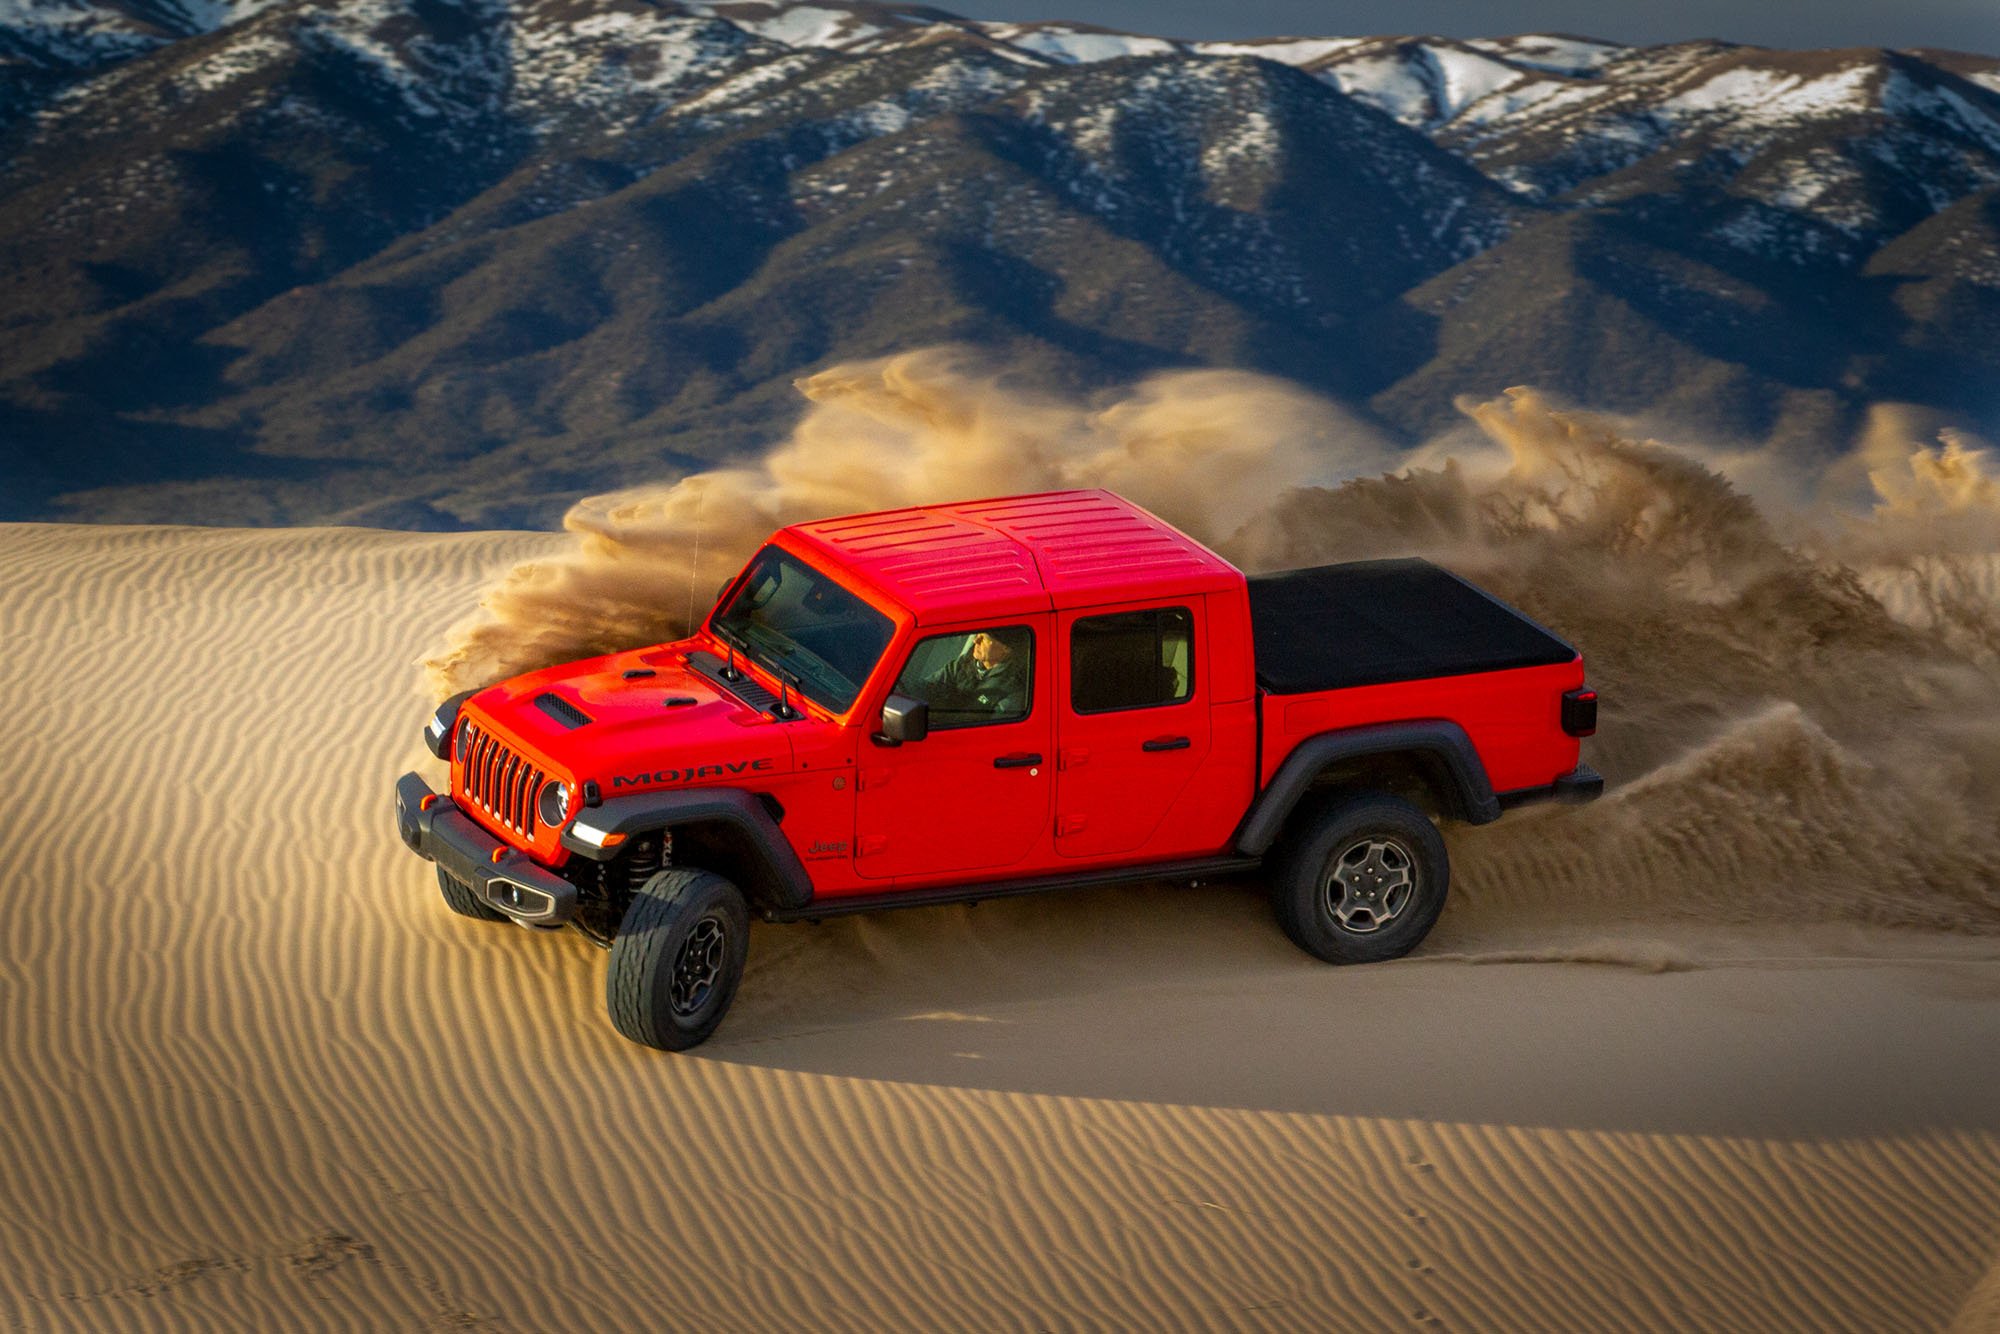 Red Jeep Gladiator turns up sand in desert.